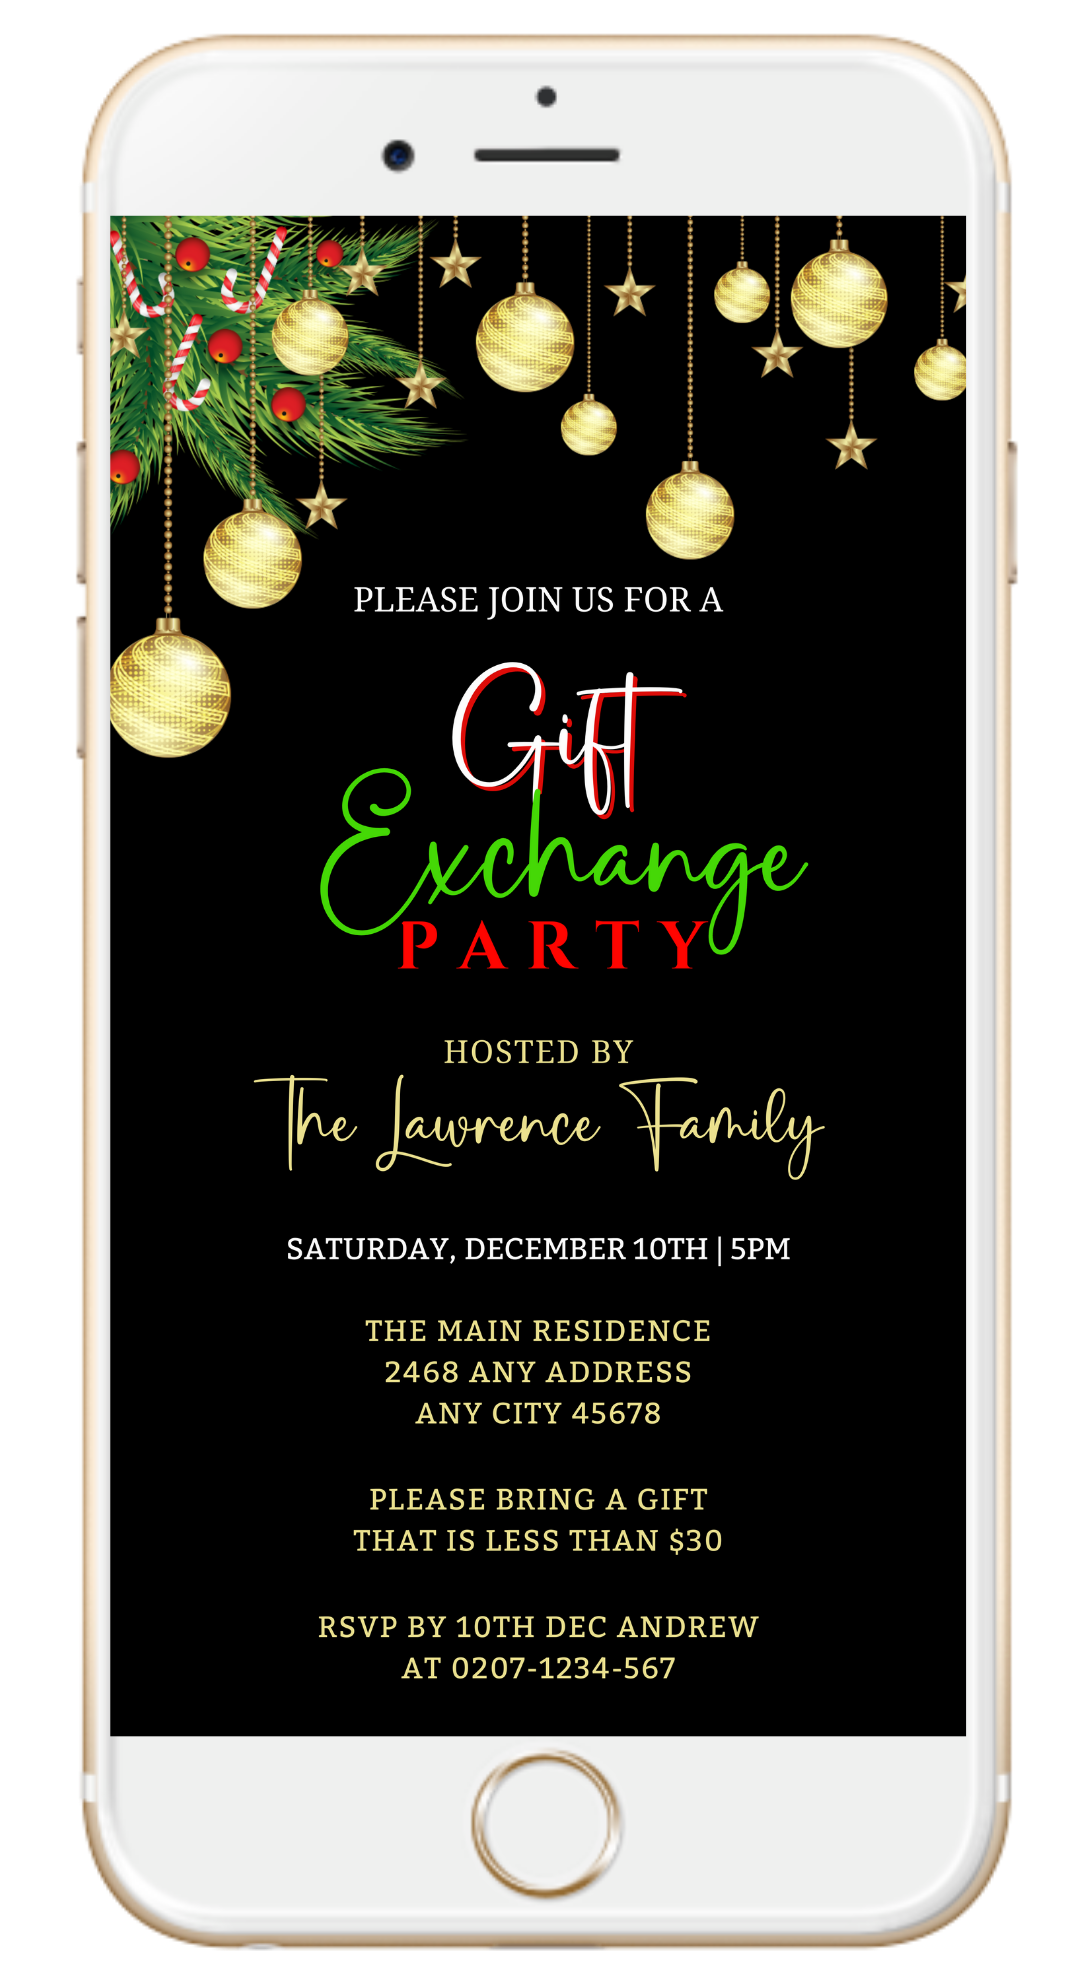 Gold Red Ornament Gift Exchange Christmas Party Invitation displayed on a smartphone screen with elegant gold text and ornaments.